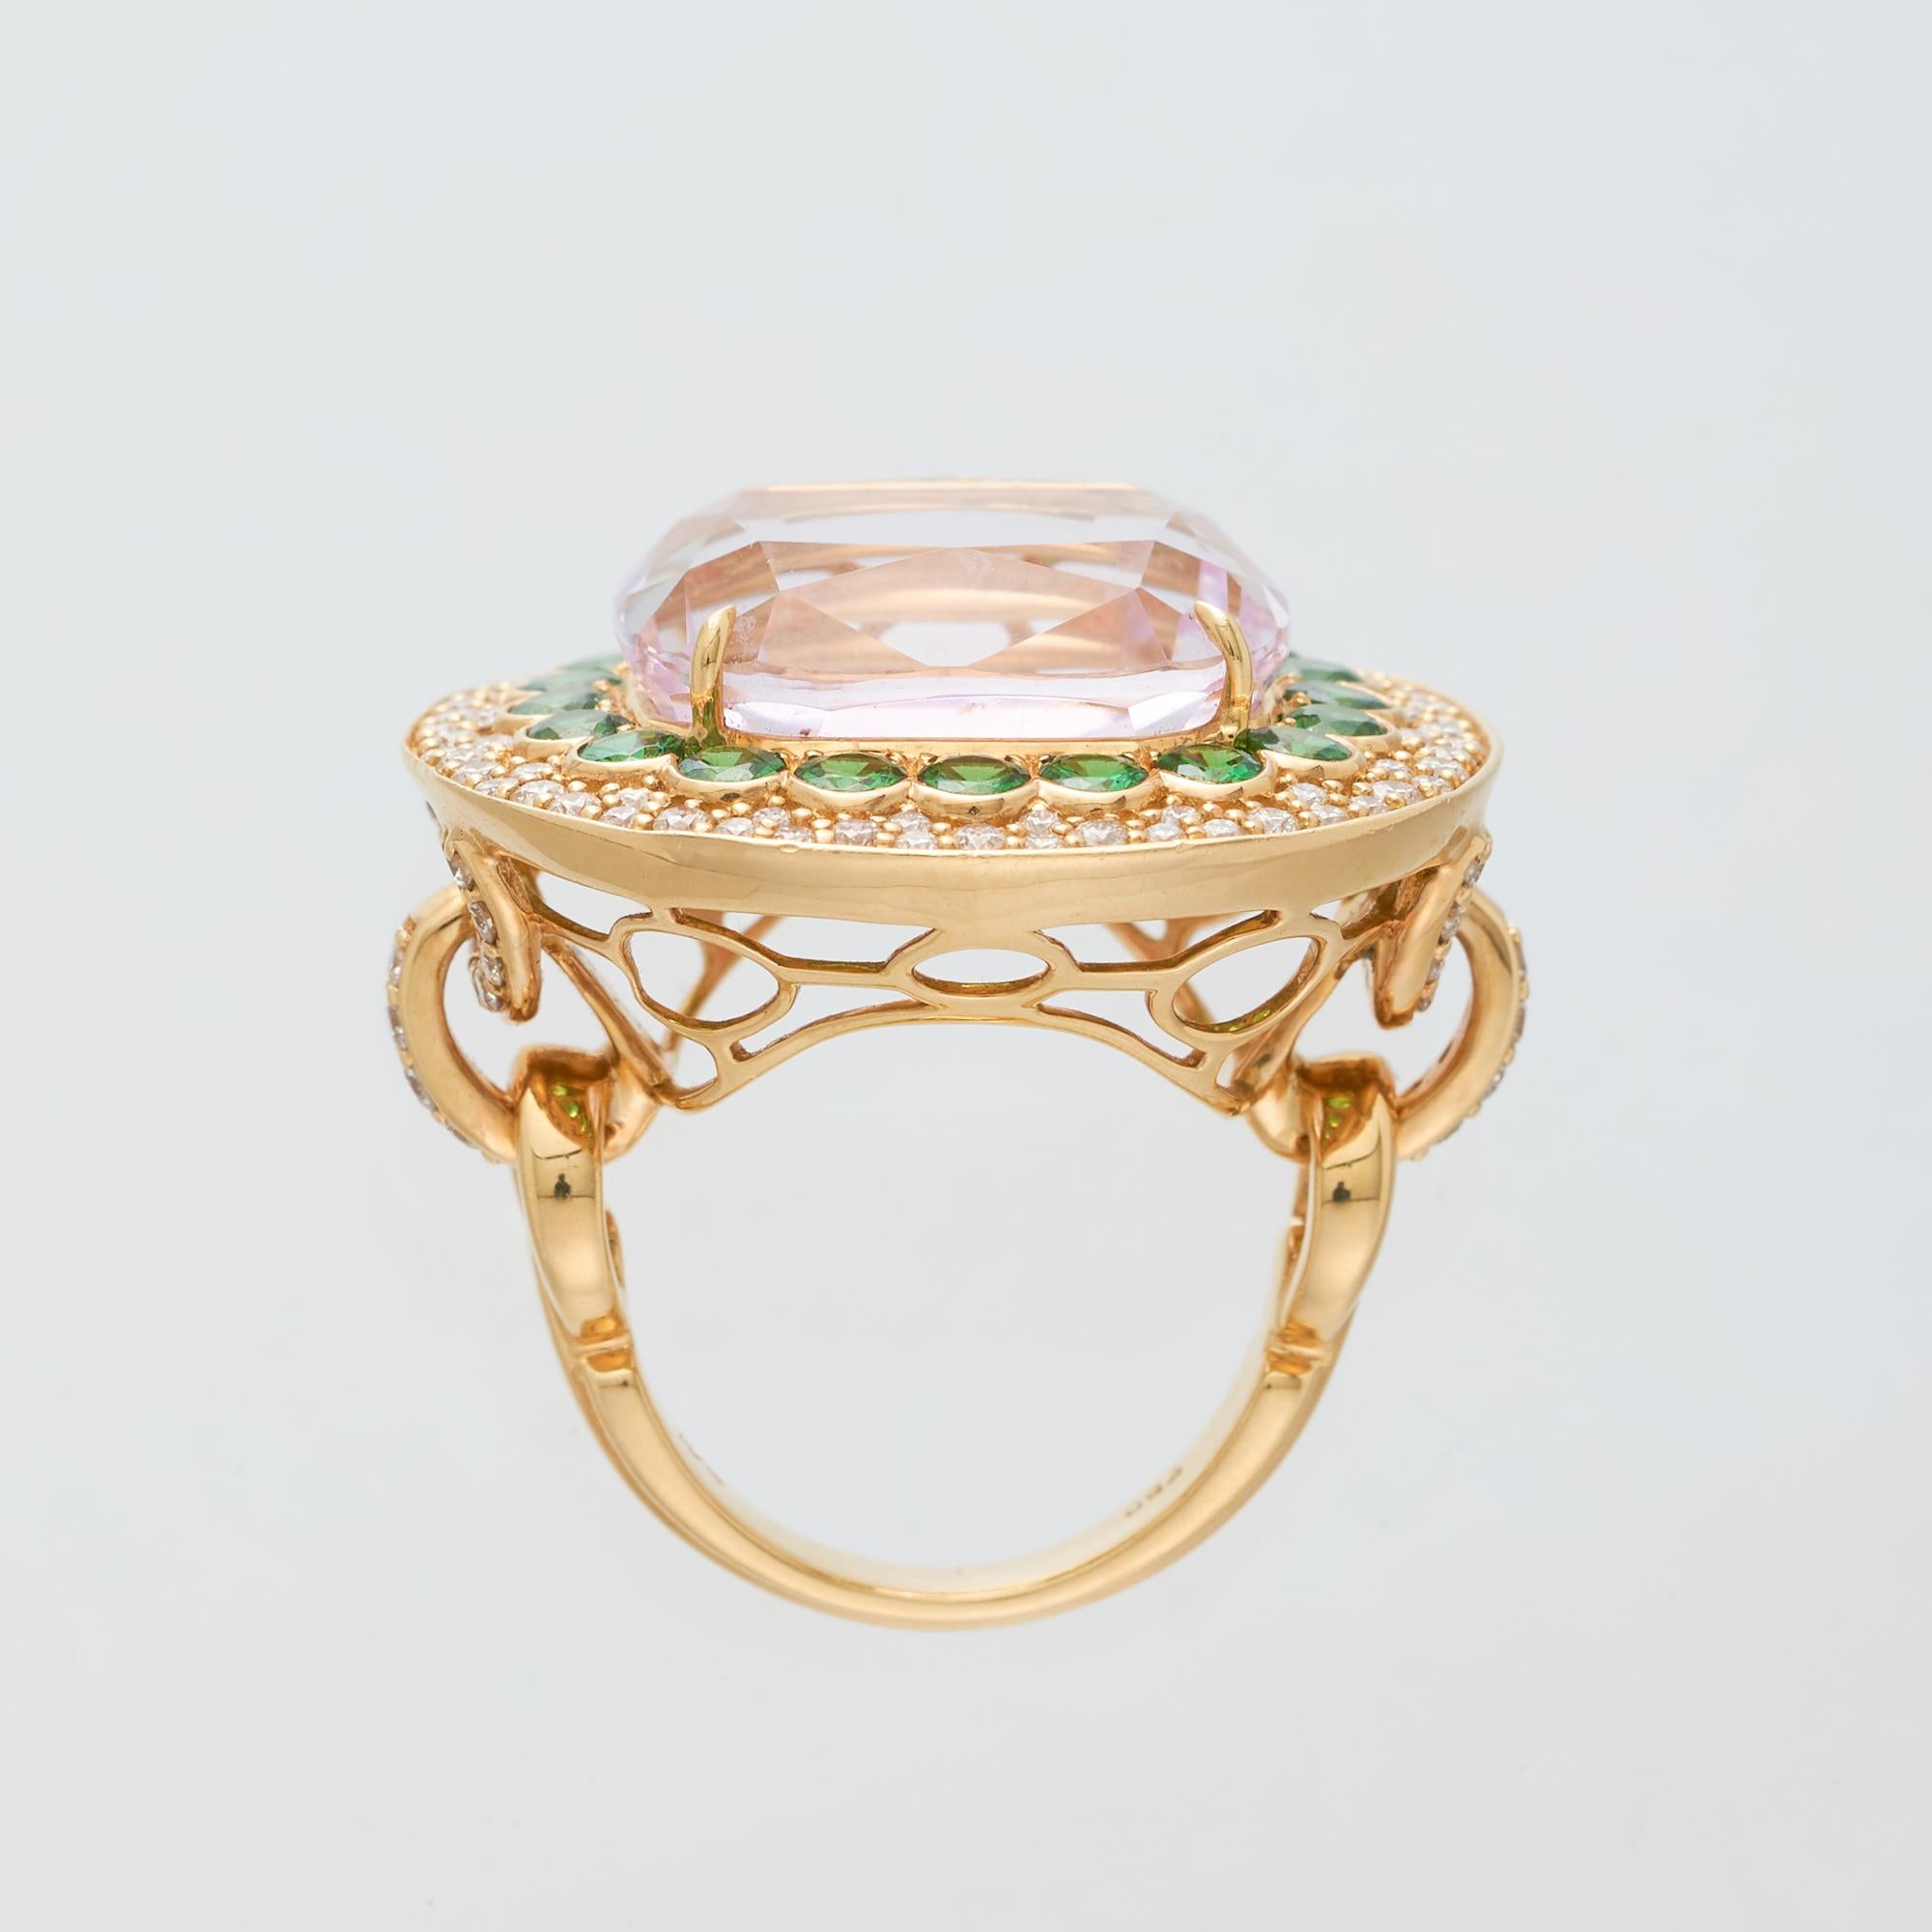 Margot McKinney 18 Karat Yellow Gold Ring set with 1 cushion cut Pink Kunzite weighing in total 23.43ct. The Kunzite is surrounded by a single border of 20  Tsavorites weighing in total 2.51ct and tapering to a double row border of 100 brilliant cut